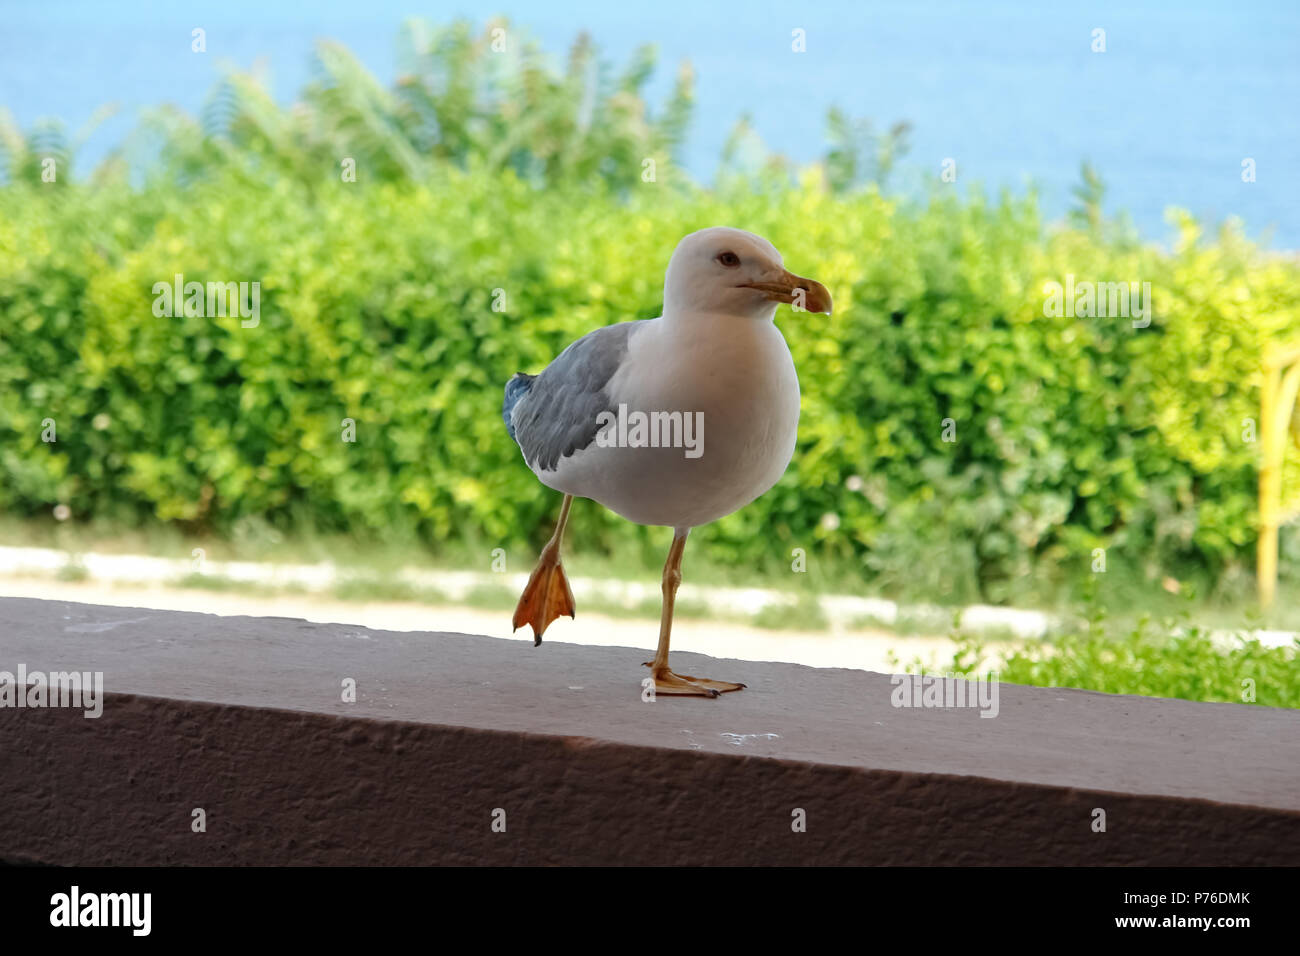 White seagull sitting on the parapet of the outdoor restaurant. Stock Photo